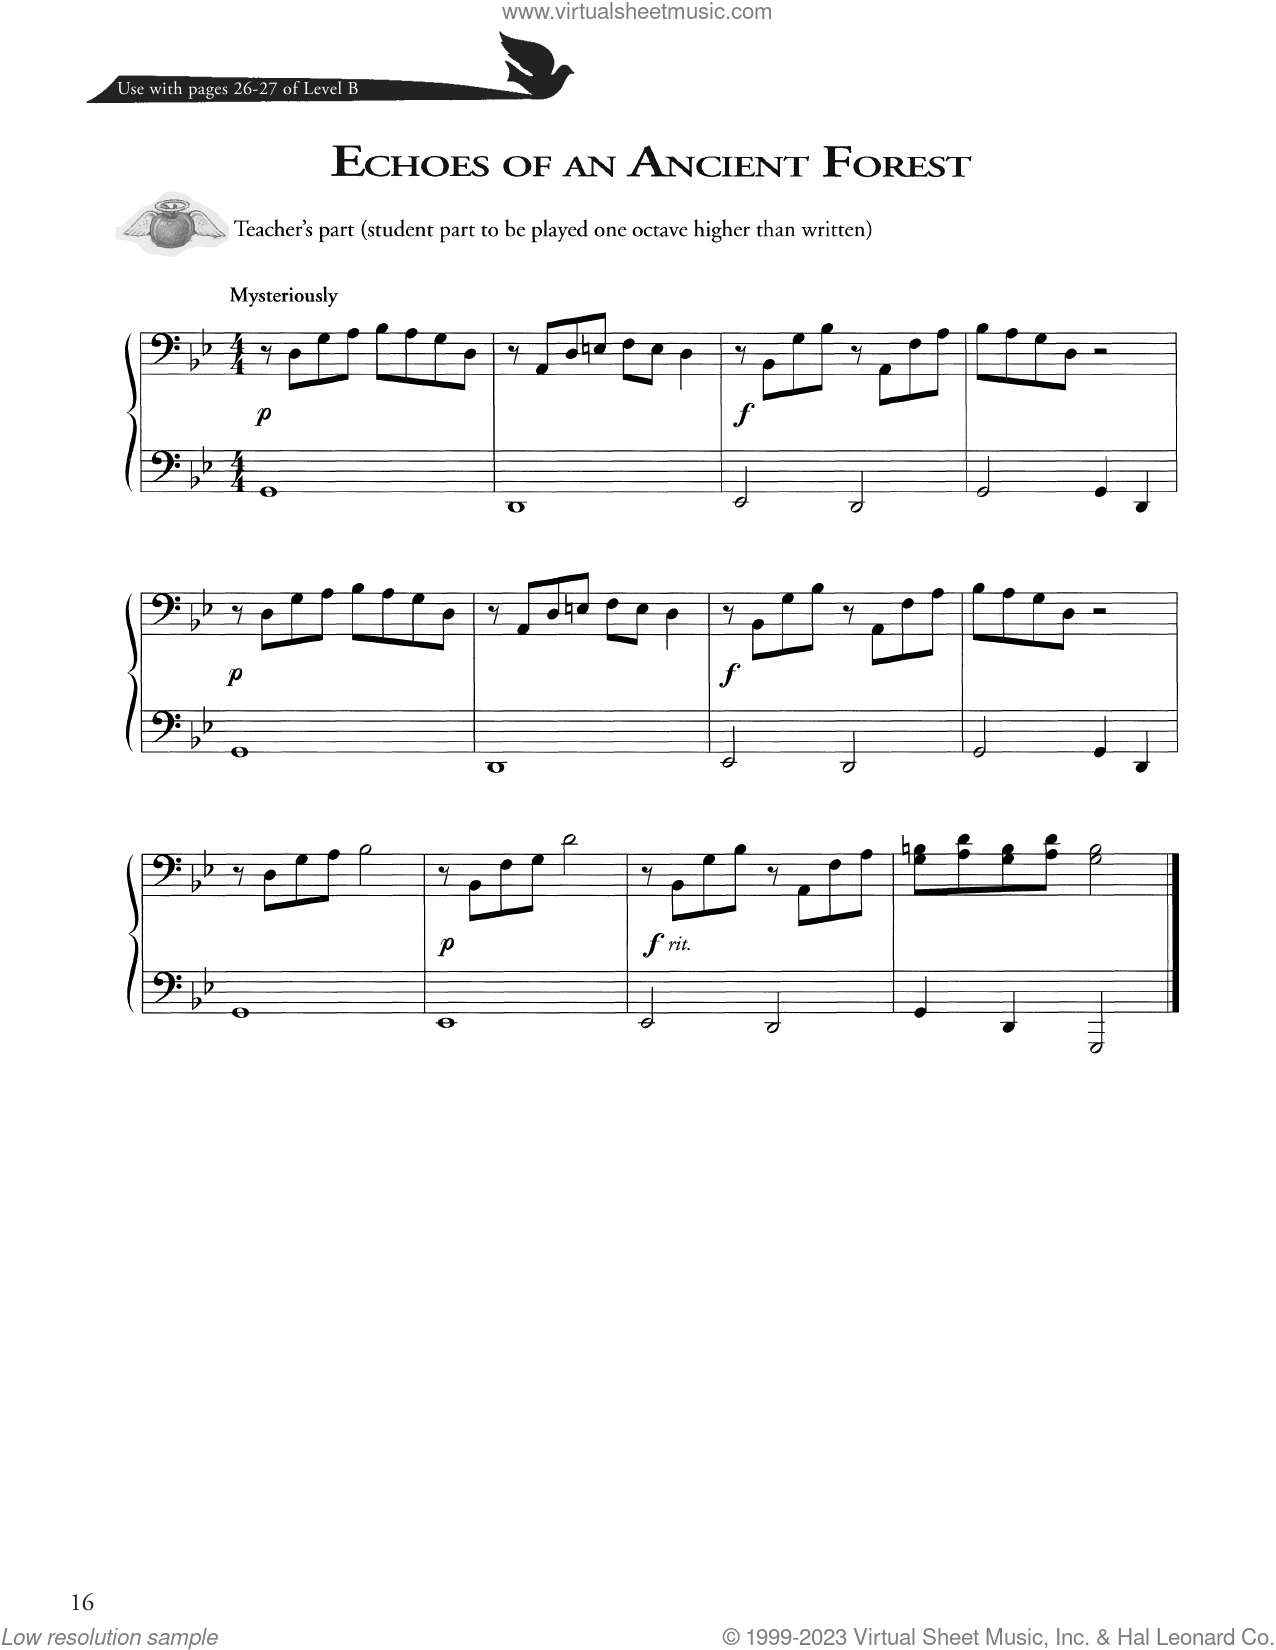 Songs Without Words (Book III), op. 38, no. 4: Hope" Sheet Music for  Piano Solo - Sheet Music Now